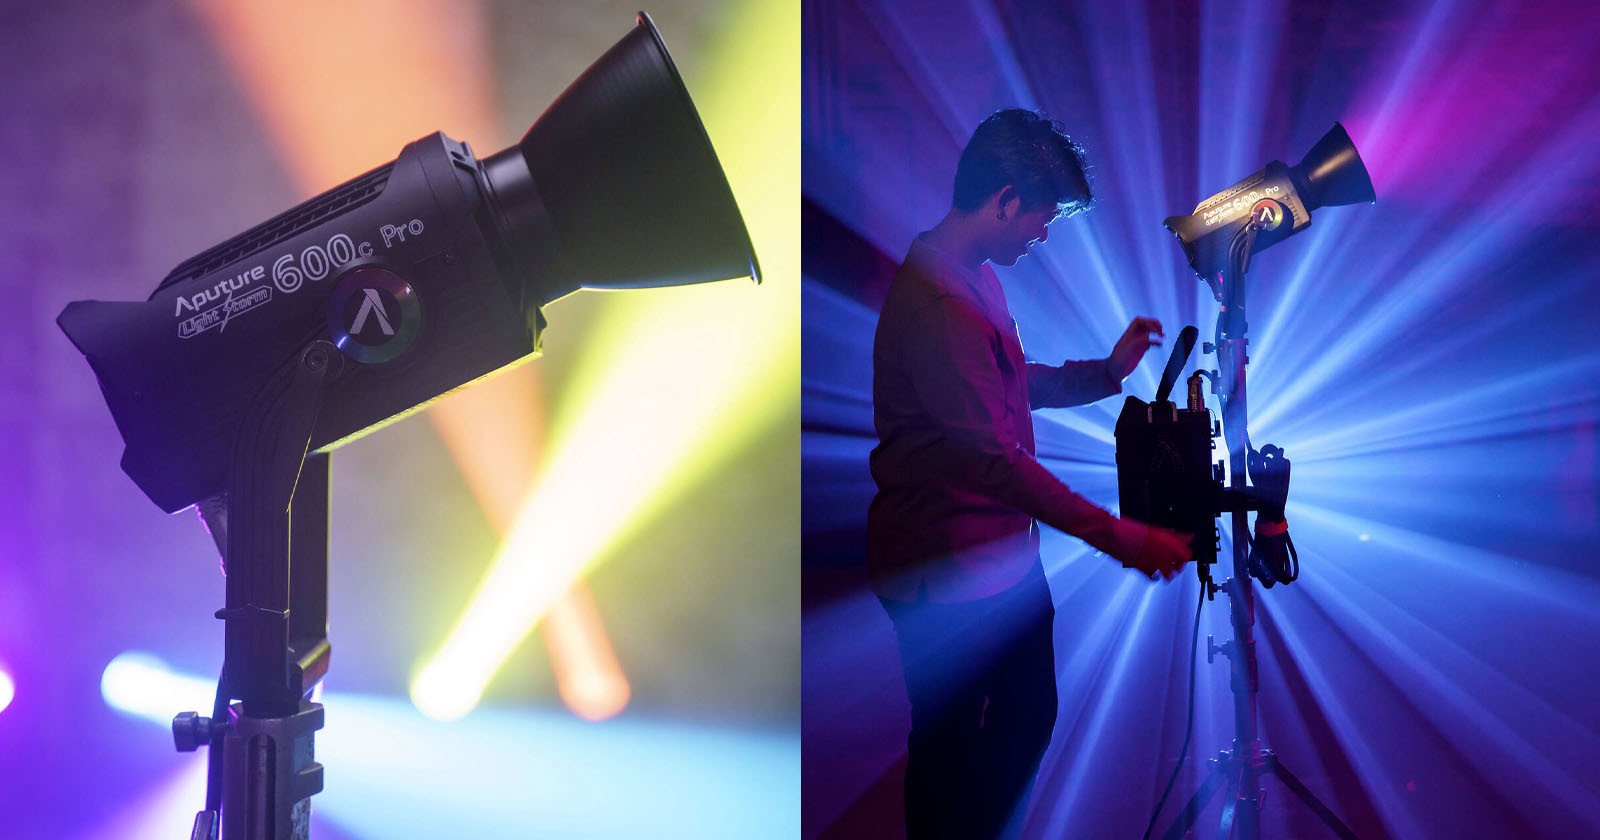 Aputure Pushes the Industry Cheaper with New LS 600C Pro LED COB